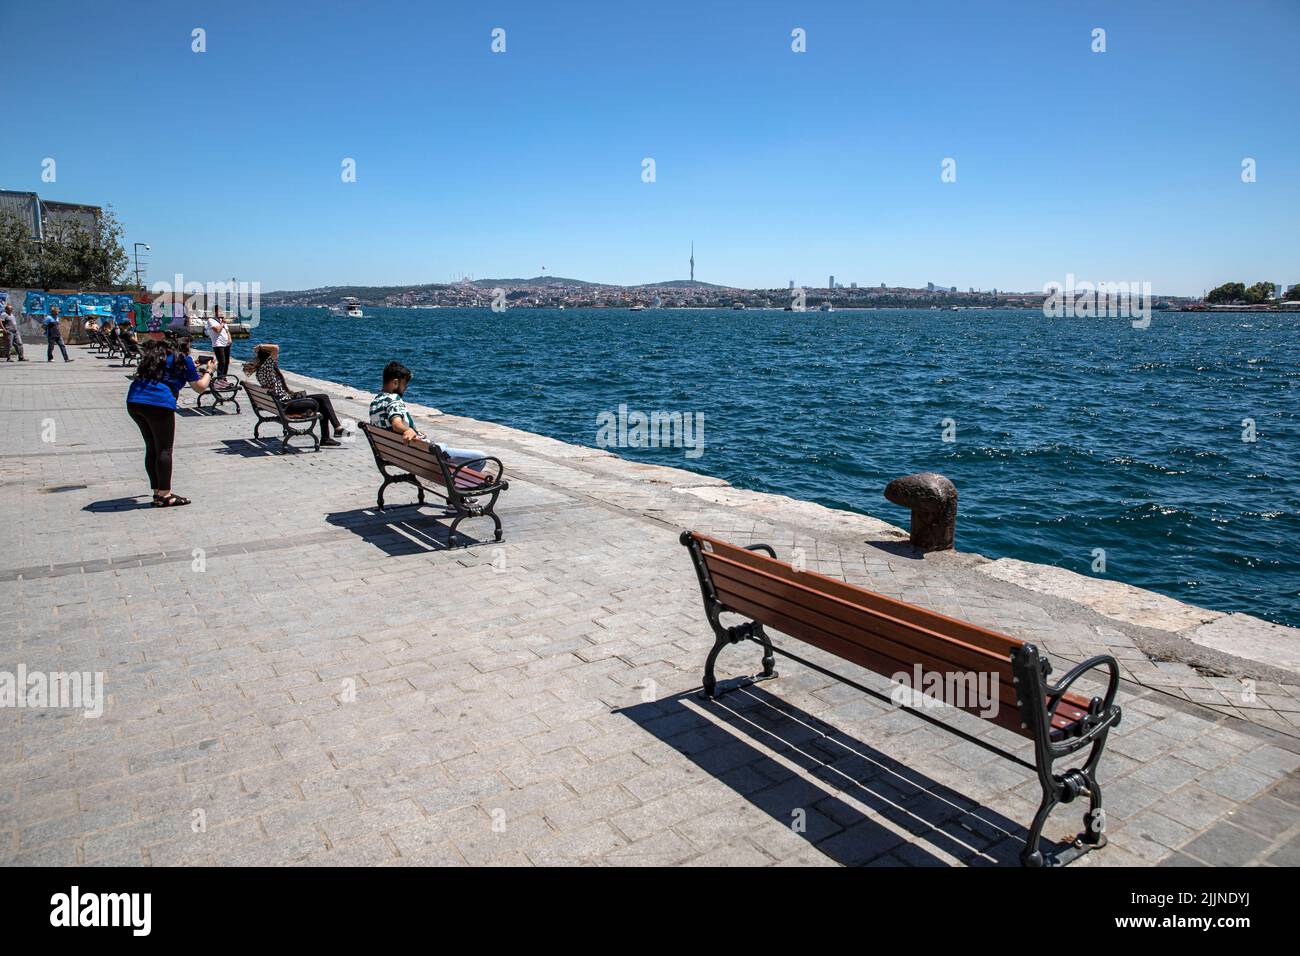 The crowd of people at Karakoy dock and its surroundings is less compared to other days due to the high temperatures. Stock Photo